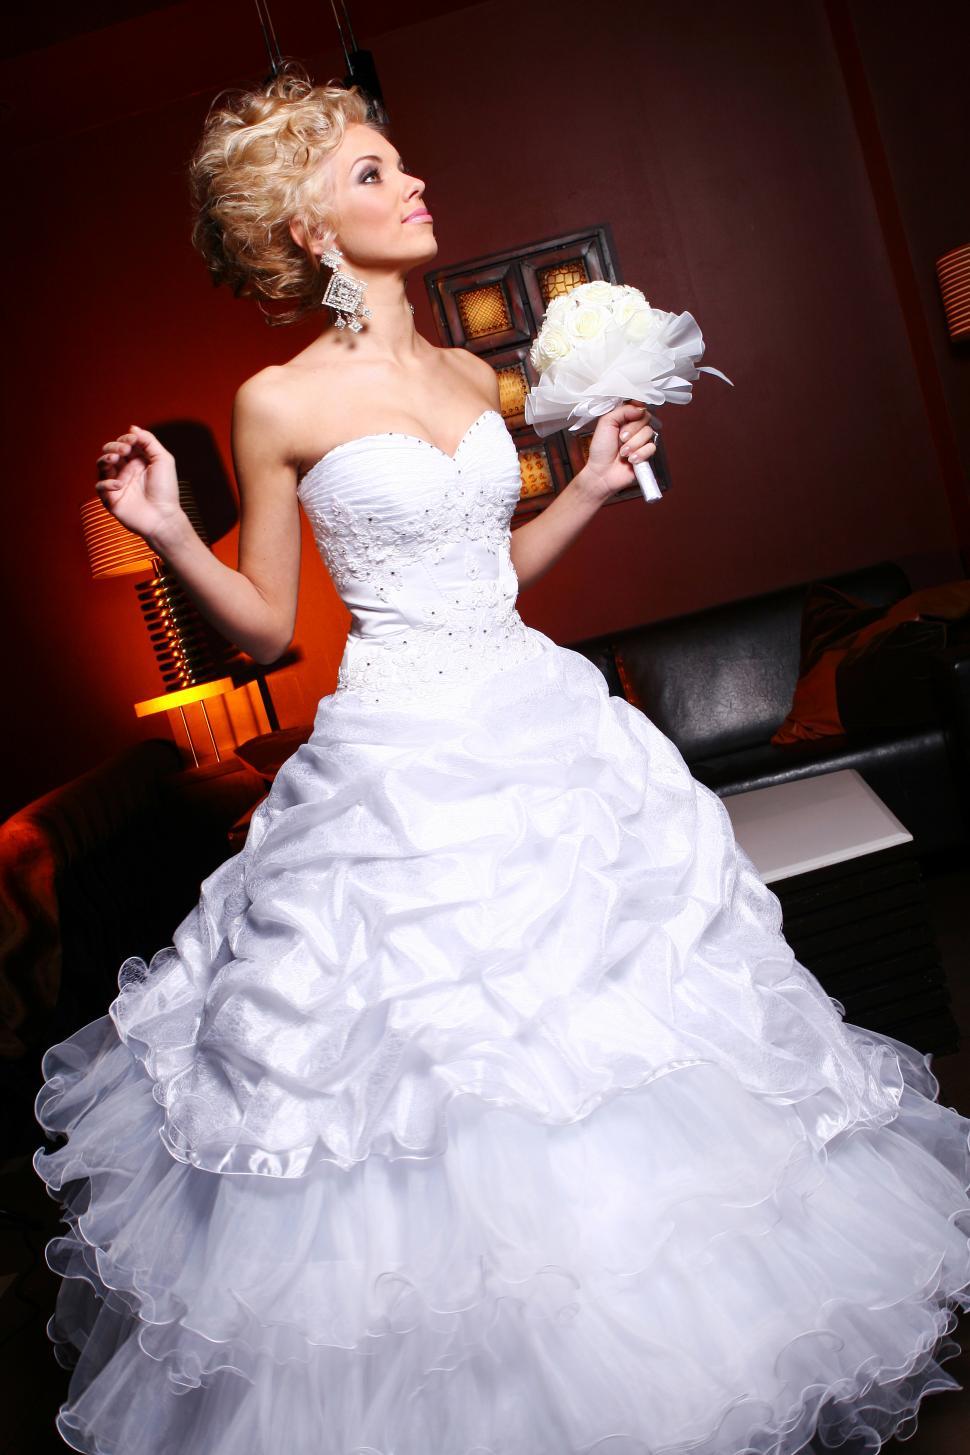 Free Image of Young bride in stunning white wedding dress 